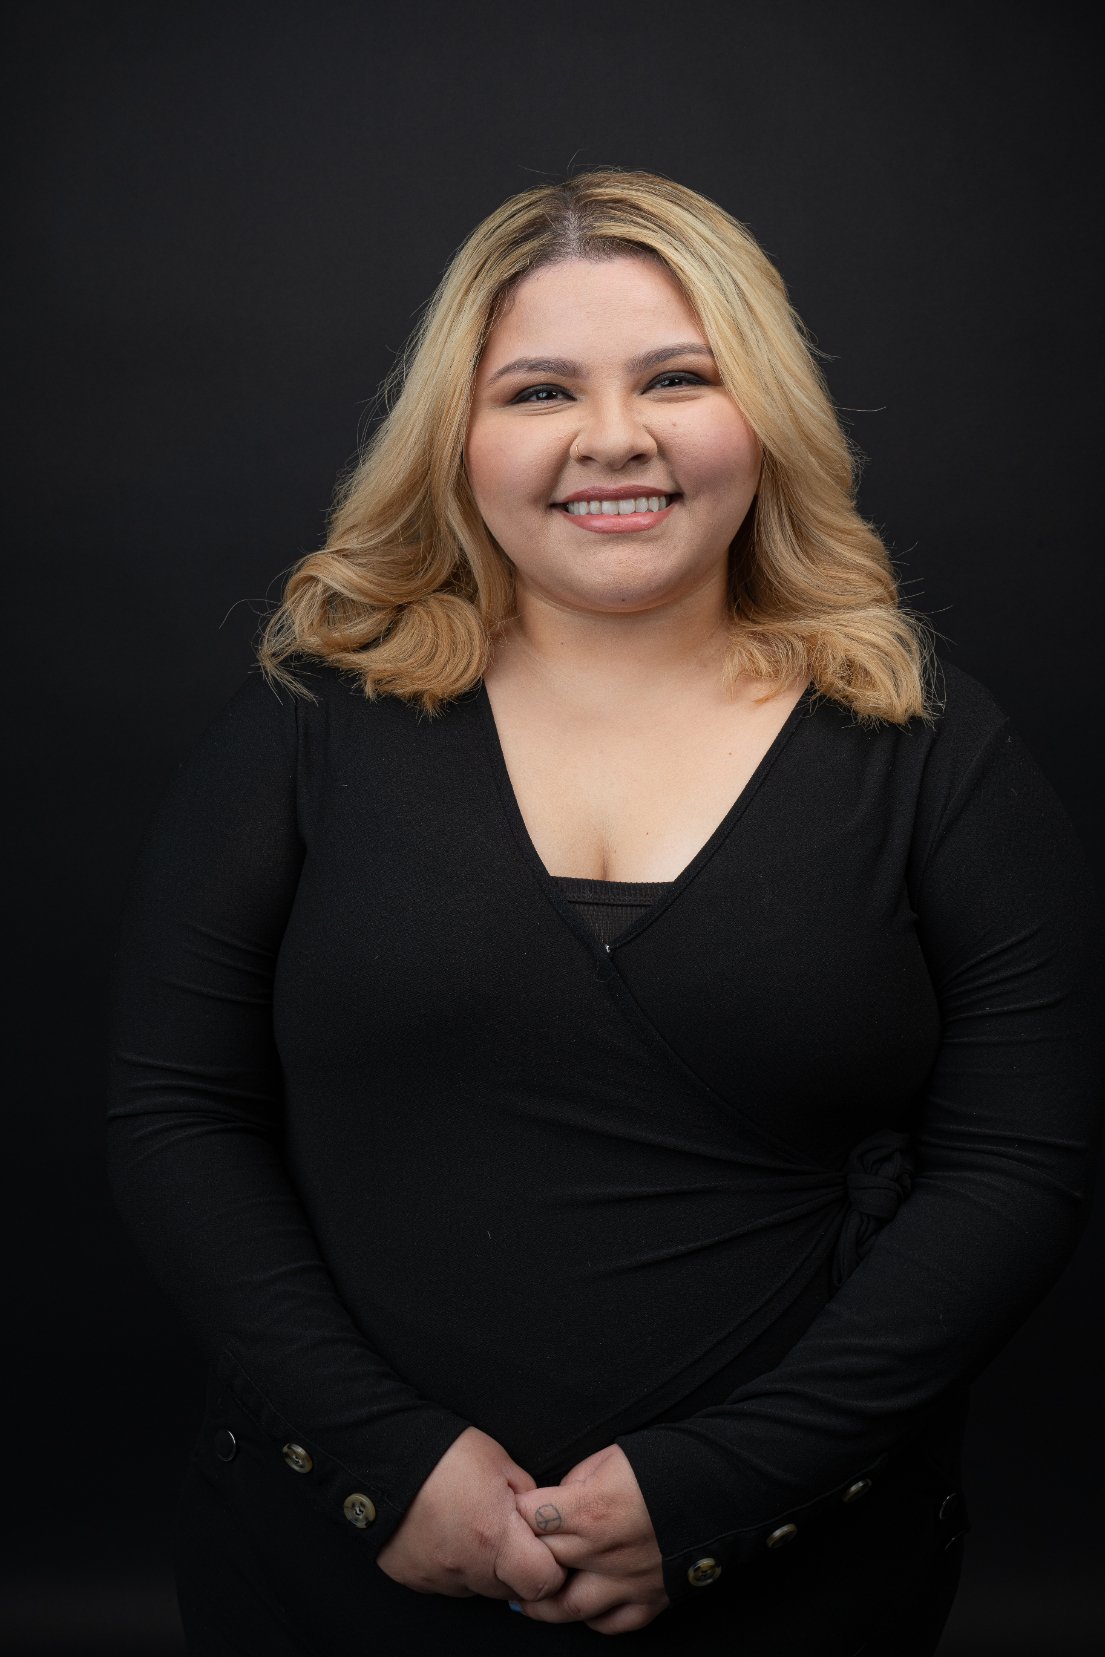 Genevie Novela has worked as a Case Manager for the last seven years. She is a certified Notary Public and is often described as customer-oriented, organized, and friendly.